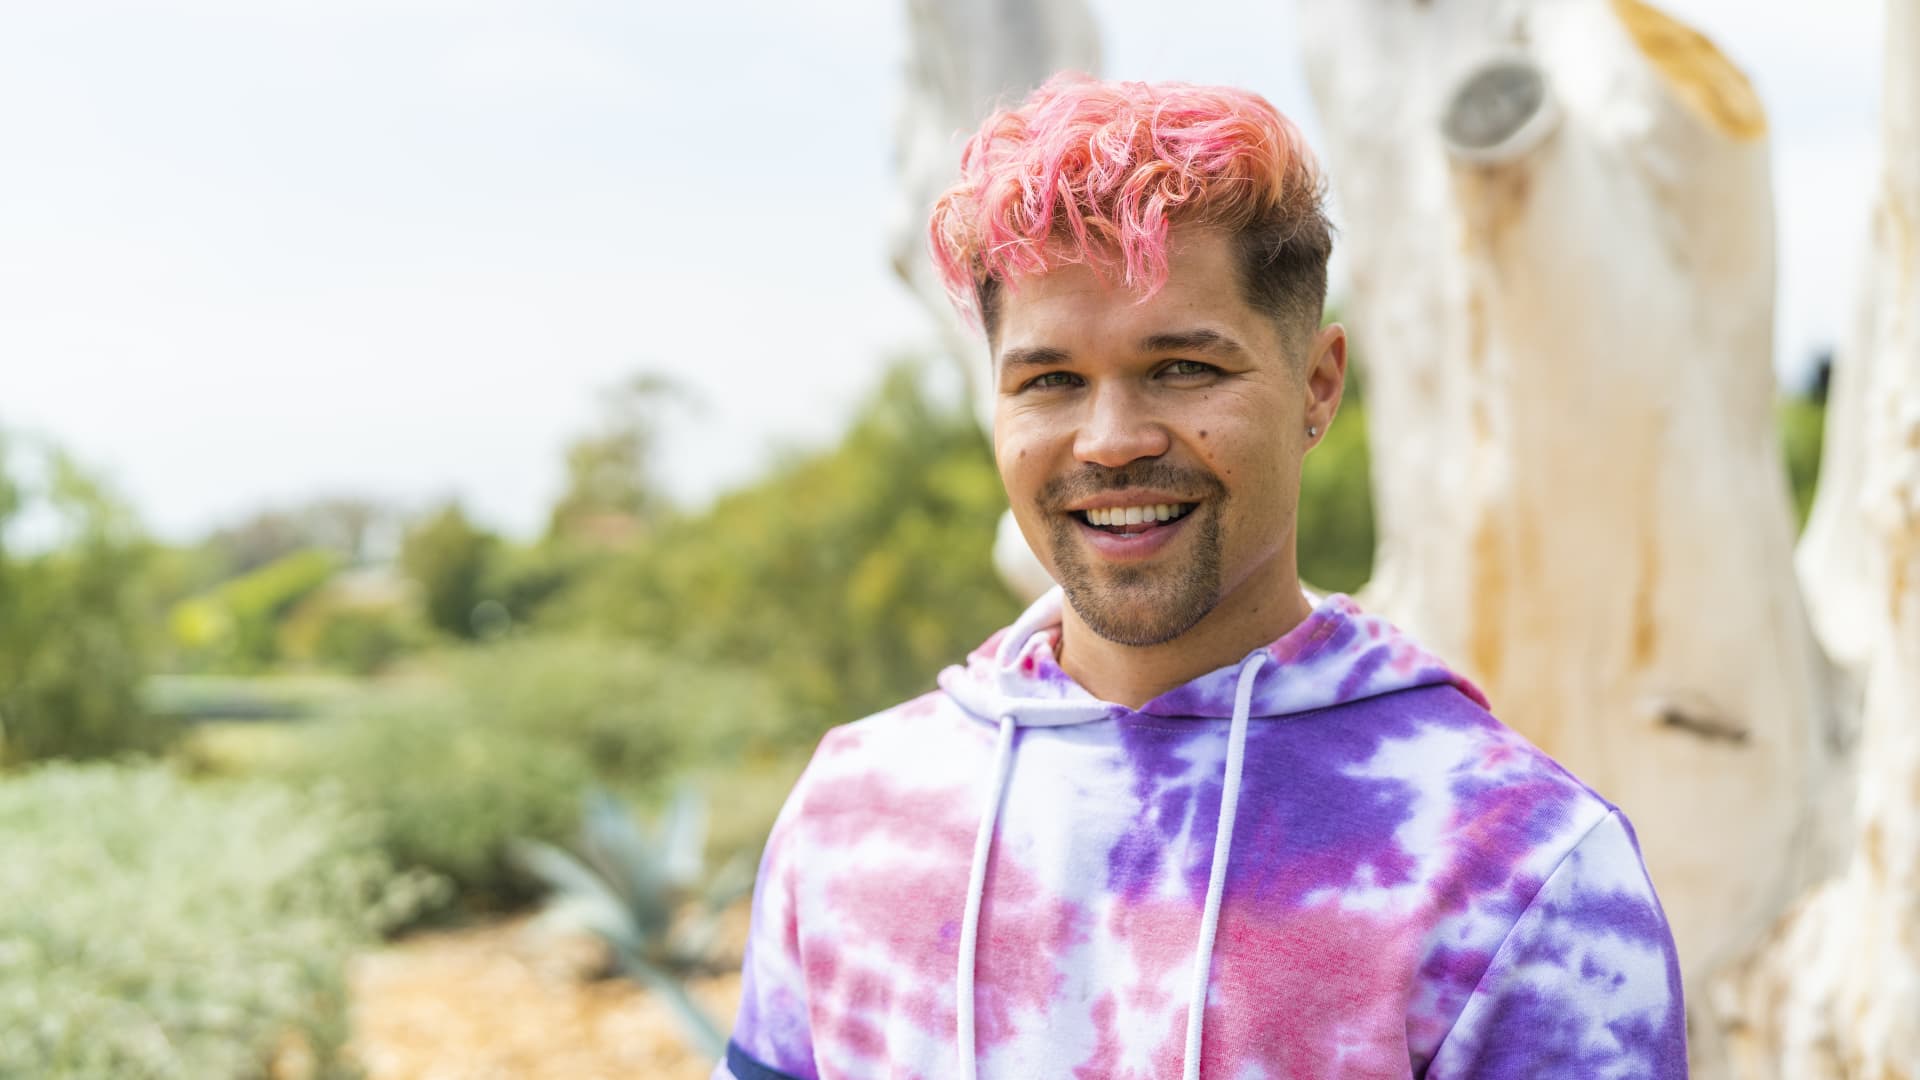 Sally Beauty is featuring people with vivid hair colors in a new ad, including Brian Terada, a LGBTQ+ advocate.